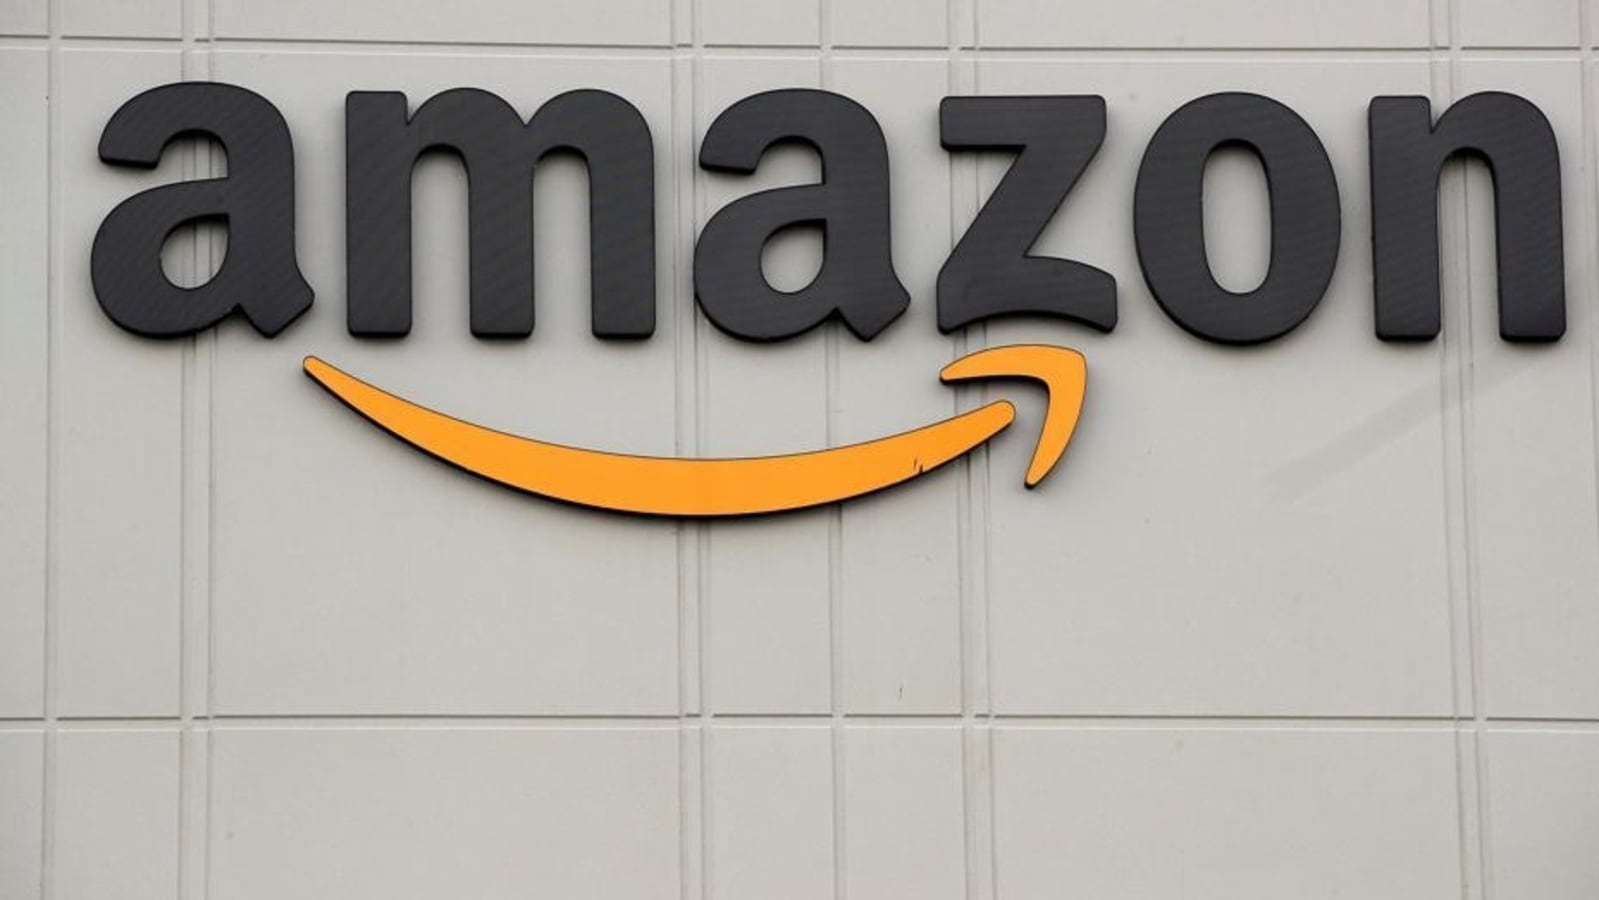 Amazon plans to lay off 10,000 people starting this week, says report